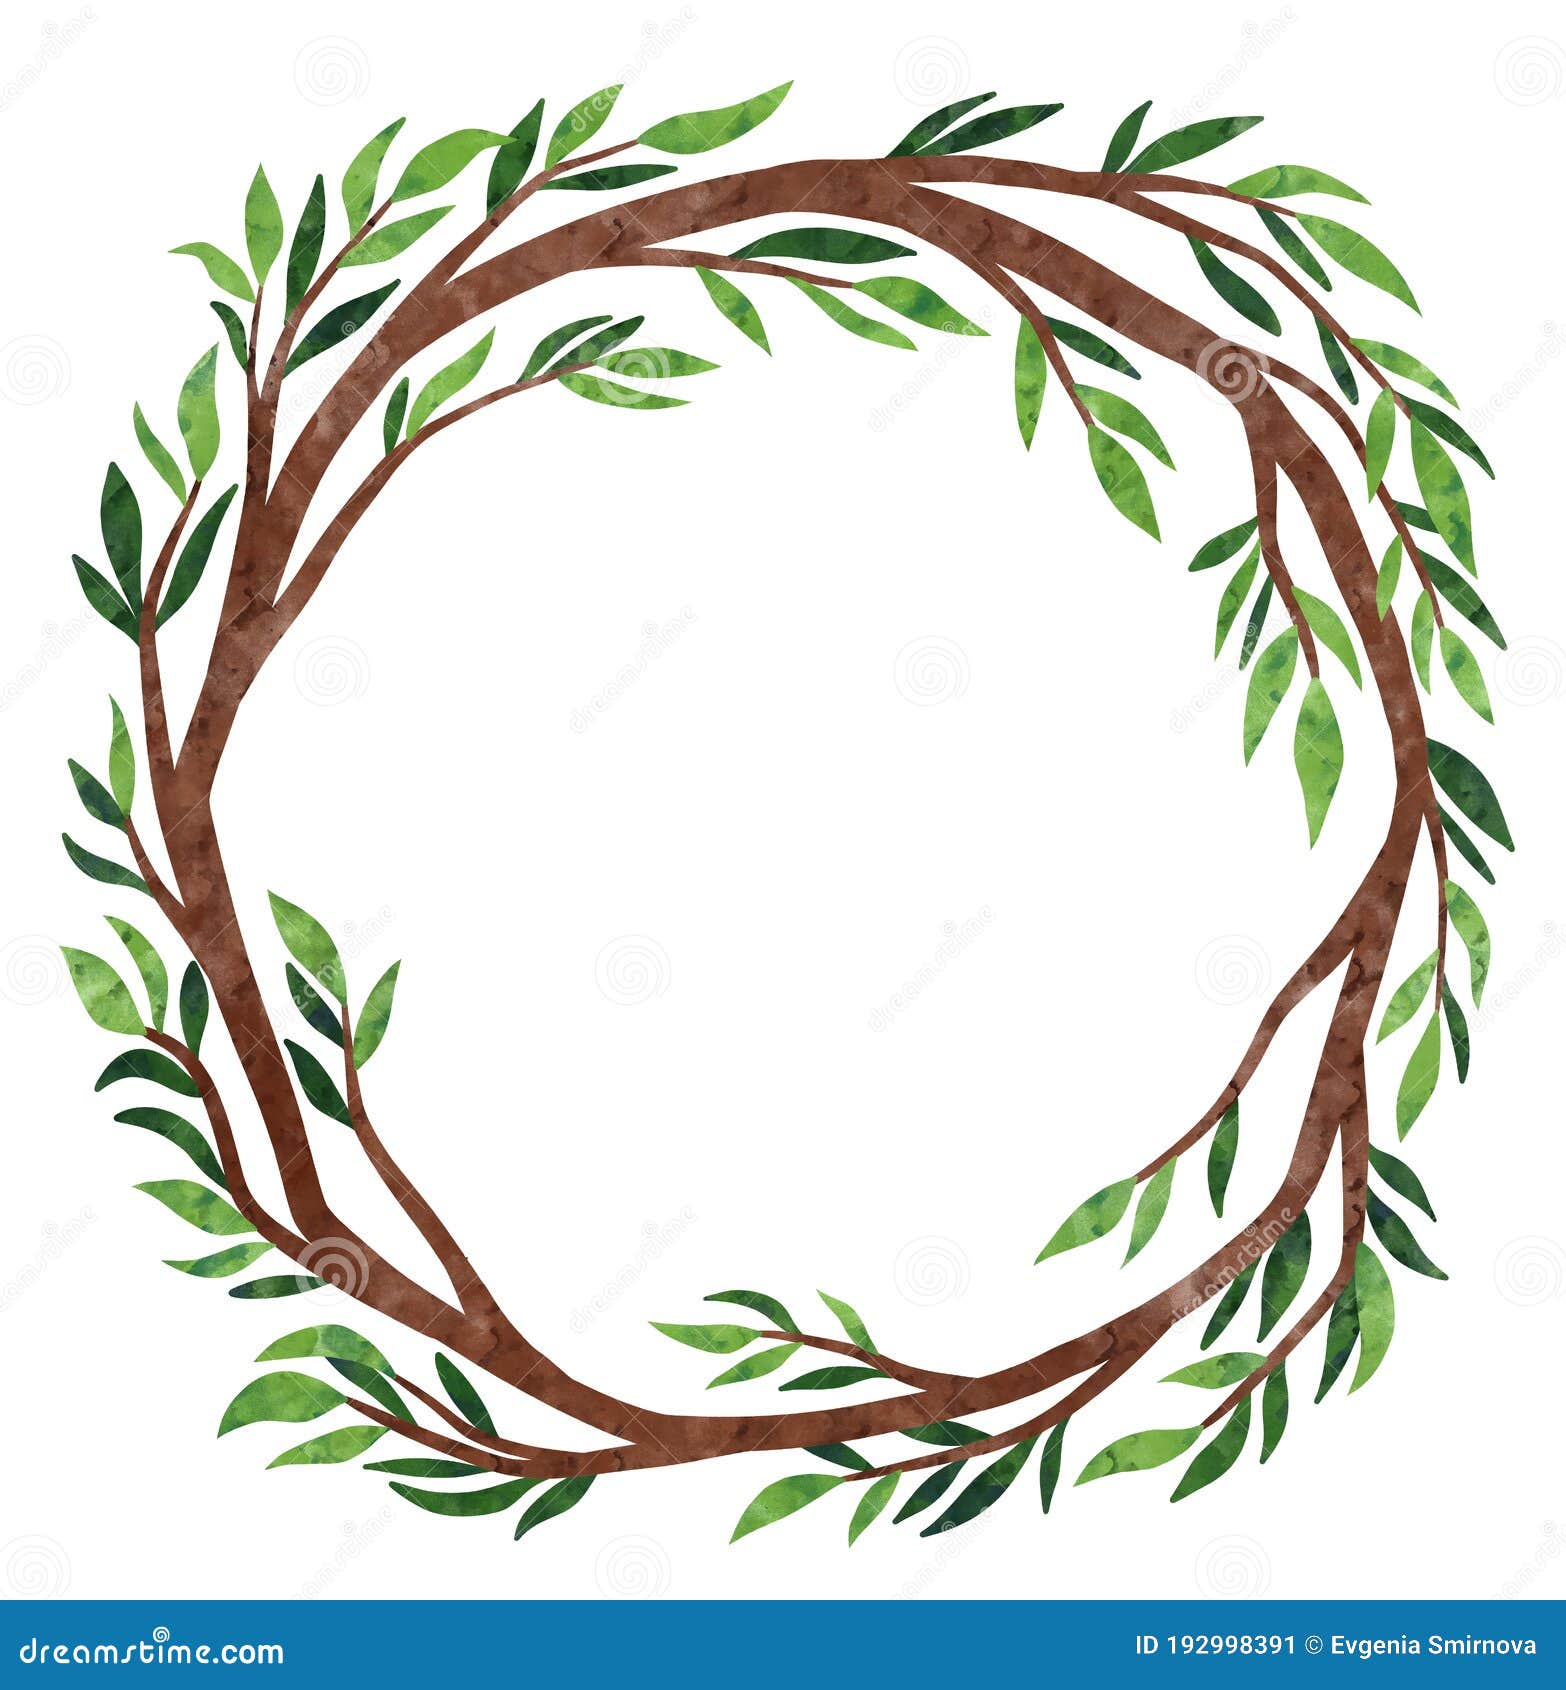 vignette design: Curly Willow Branches